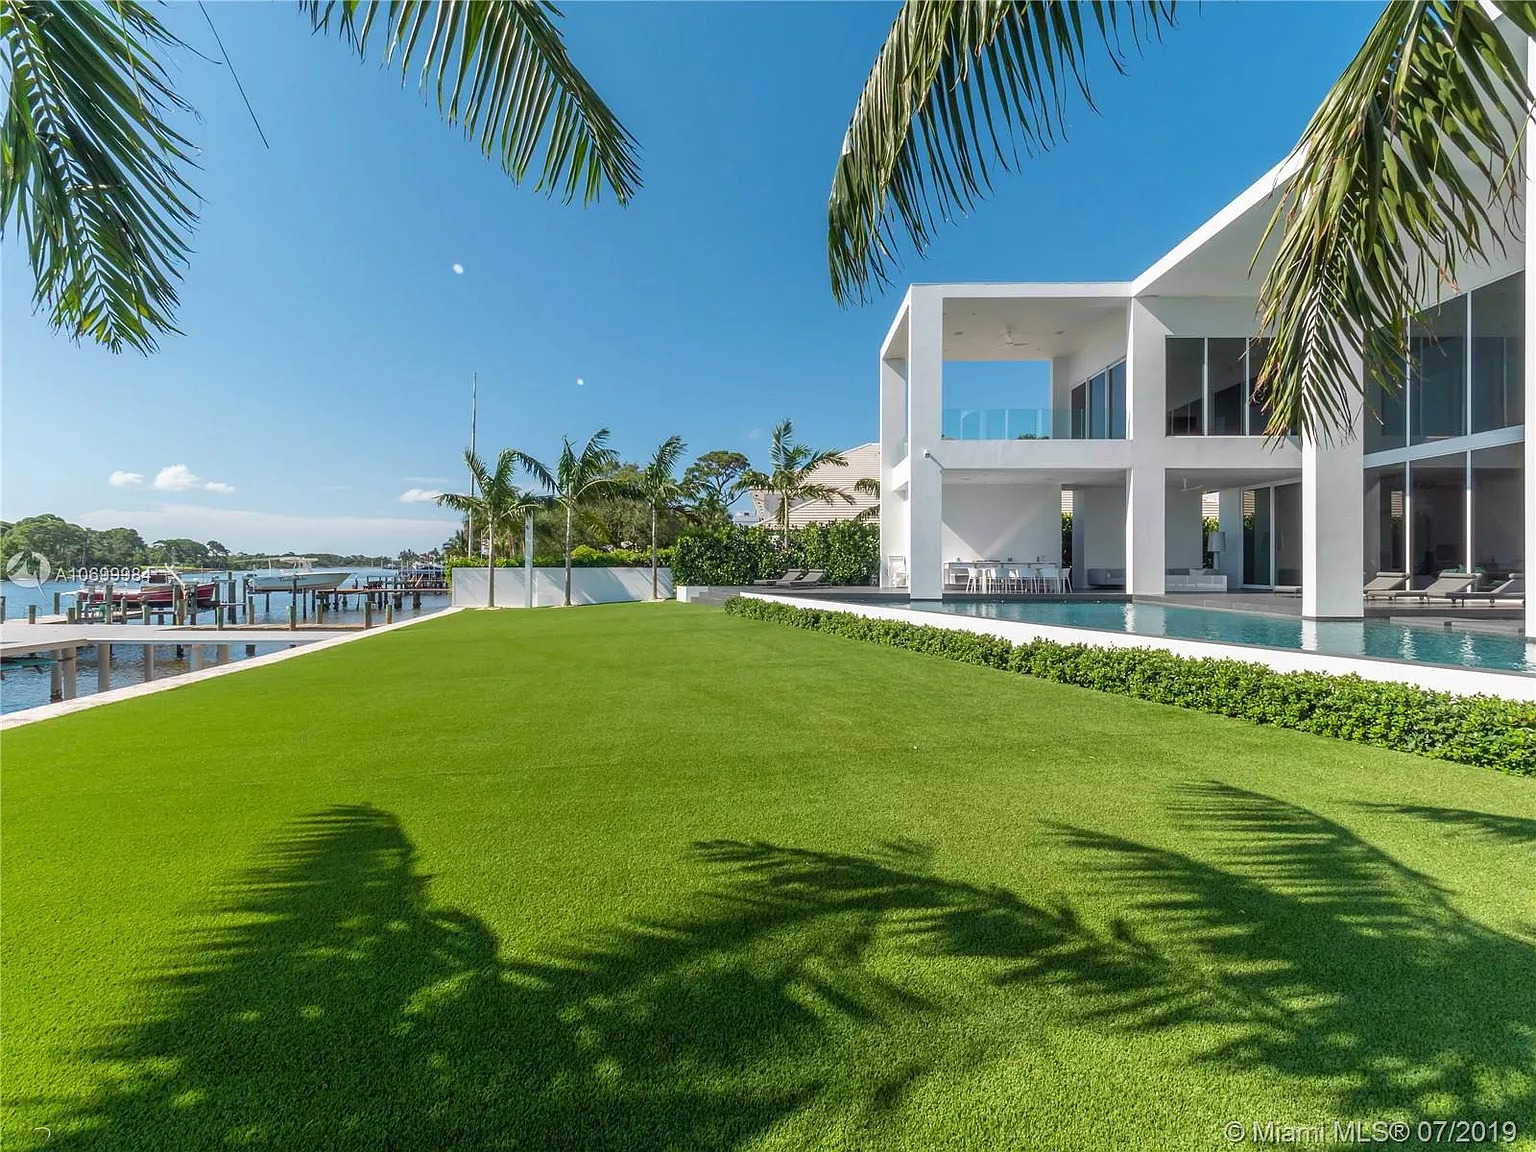 14844 Palmwood Rd, Palm Beach Gardens, FL 33410 - $10,500,000 home for sale, house images, photos and pics gallery